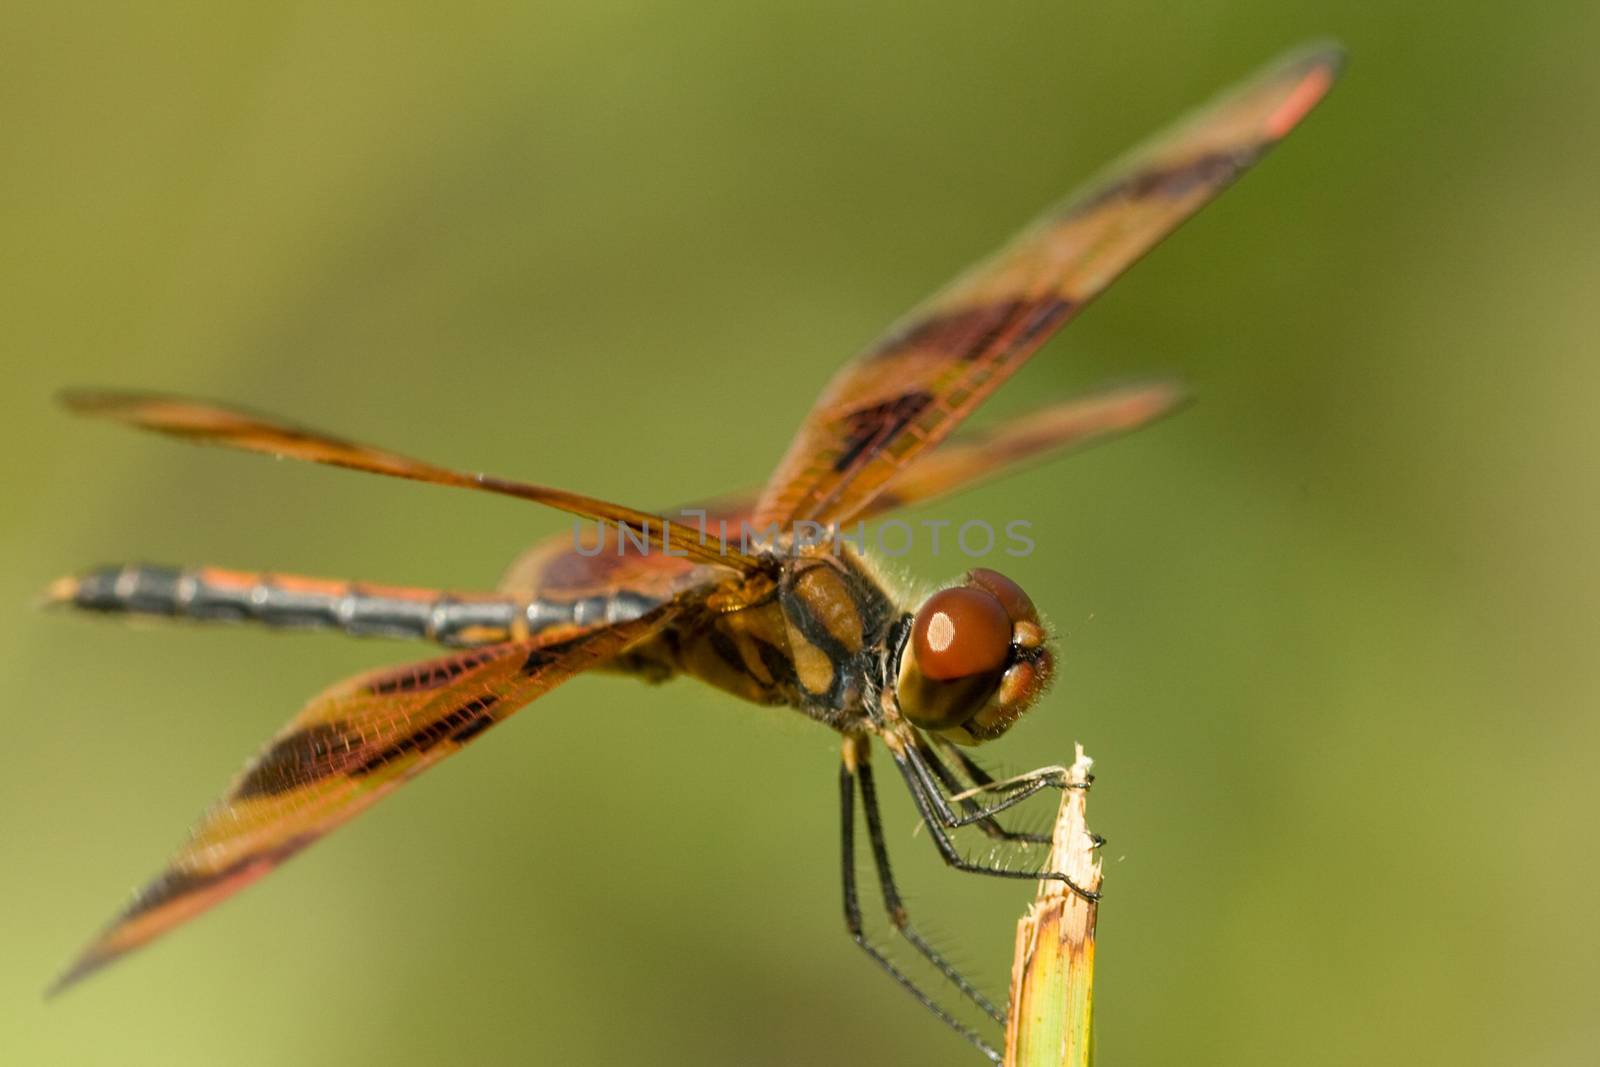 A close up of a beautiful brown dragonfly.